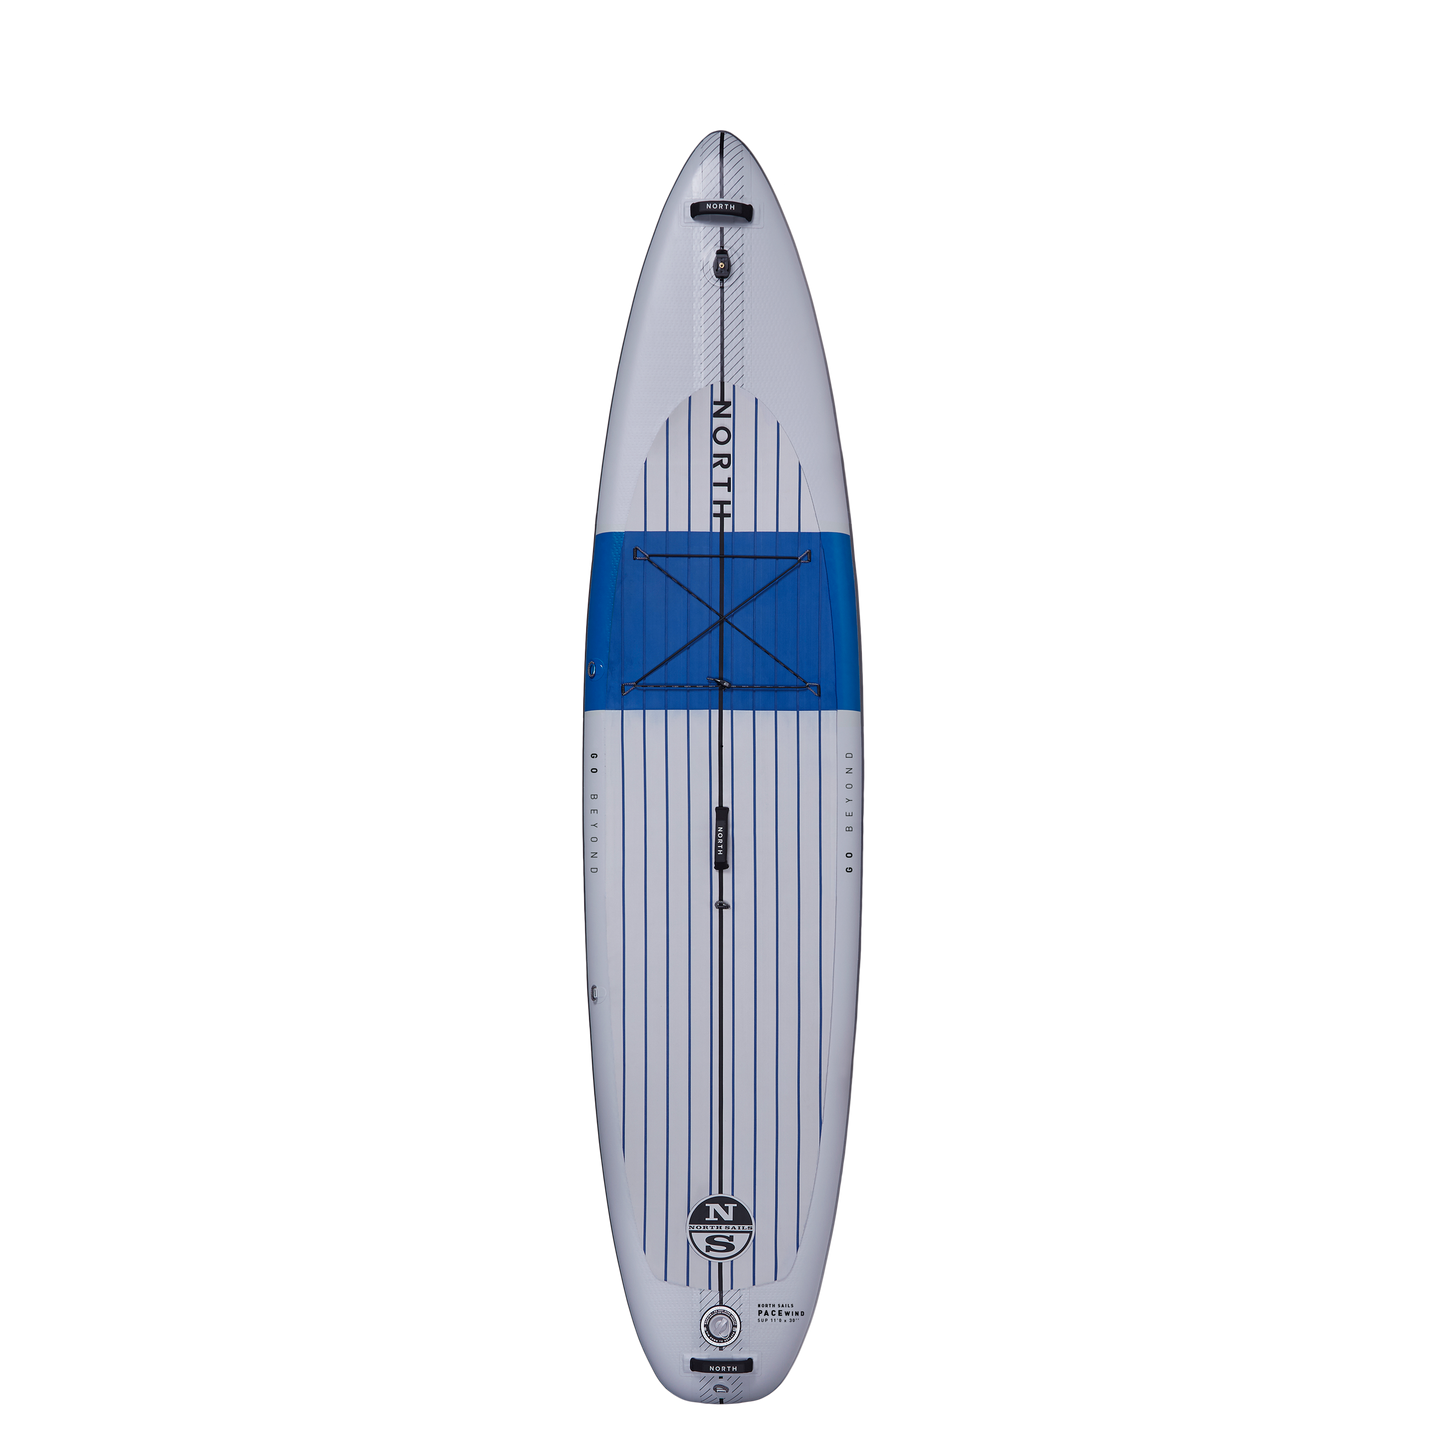 NORTH PACE WIND SUP INFLATABLE PACKAGE USED